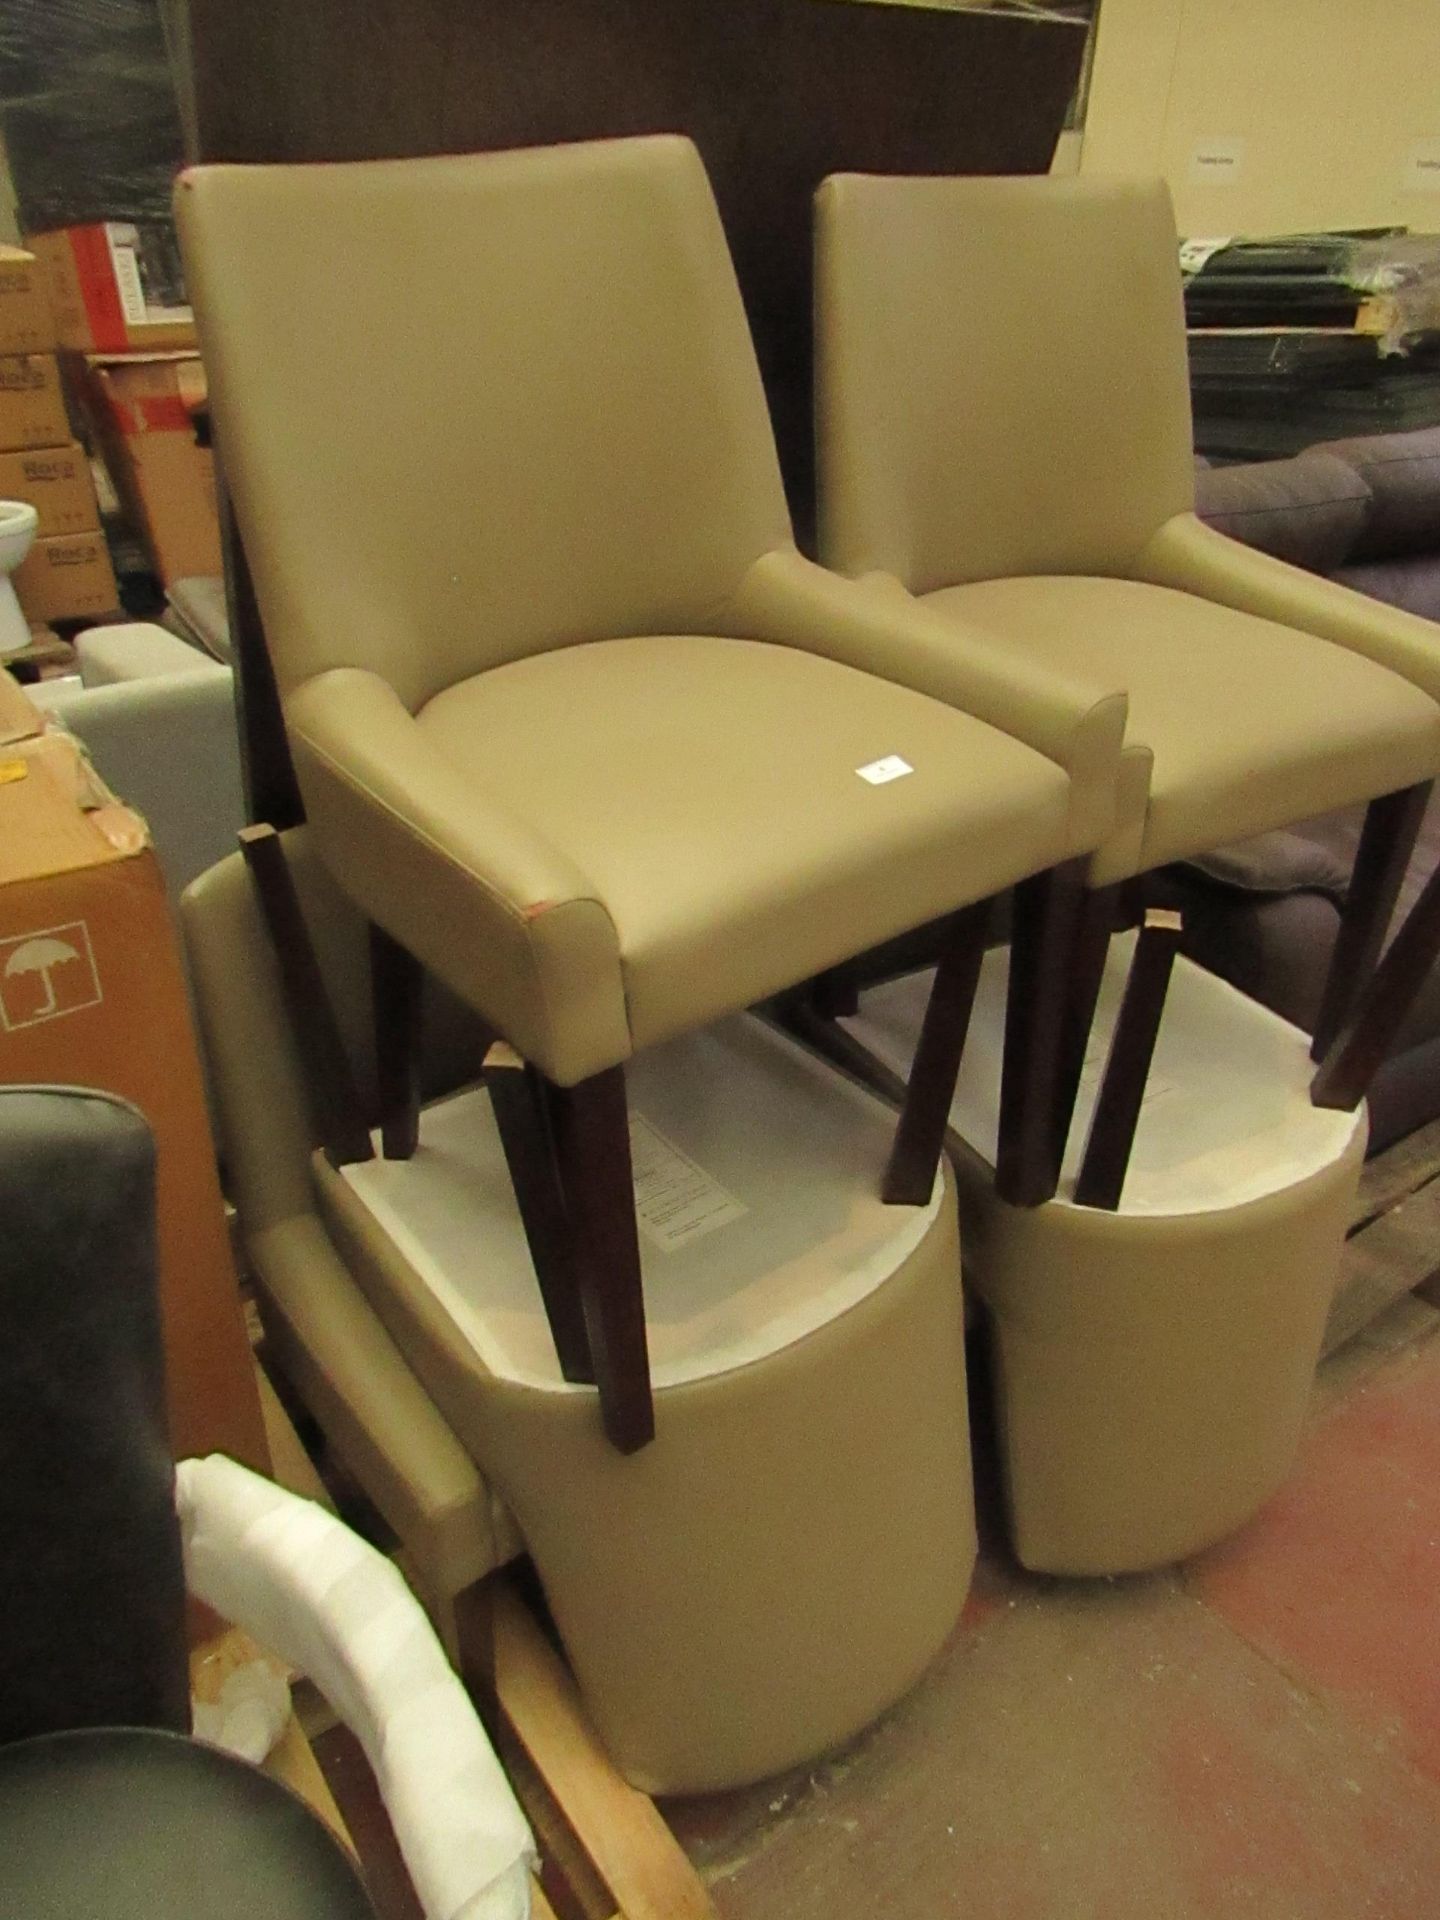 | 1X | COSTCO BAYSIDE 6-PIECE DININD SET | CHAIRS ARE DAMAGED & TABLE HAS CHIPS ON THE SIDE |